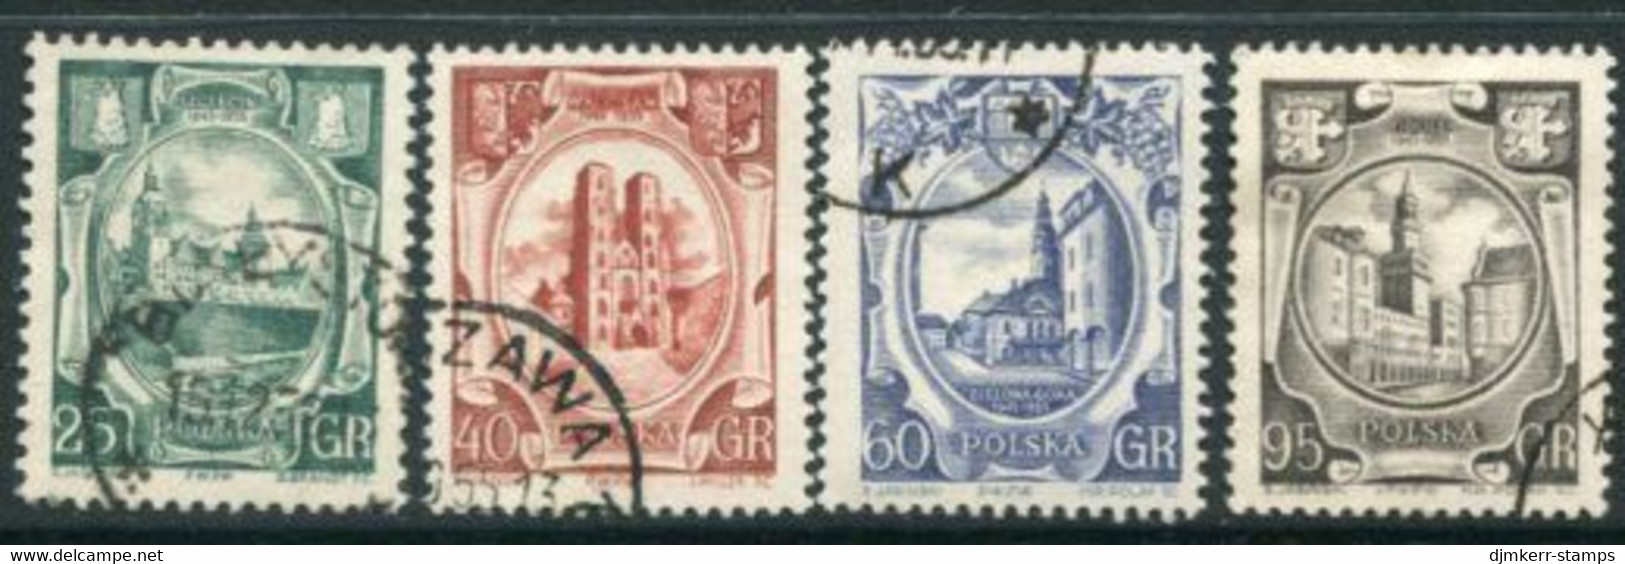 POLAND 1955 Incorporation Of Western Territories Used  Michel 942-45 - Oblitérés